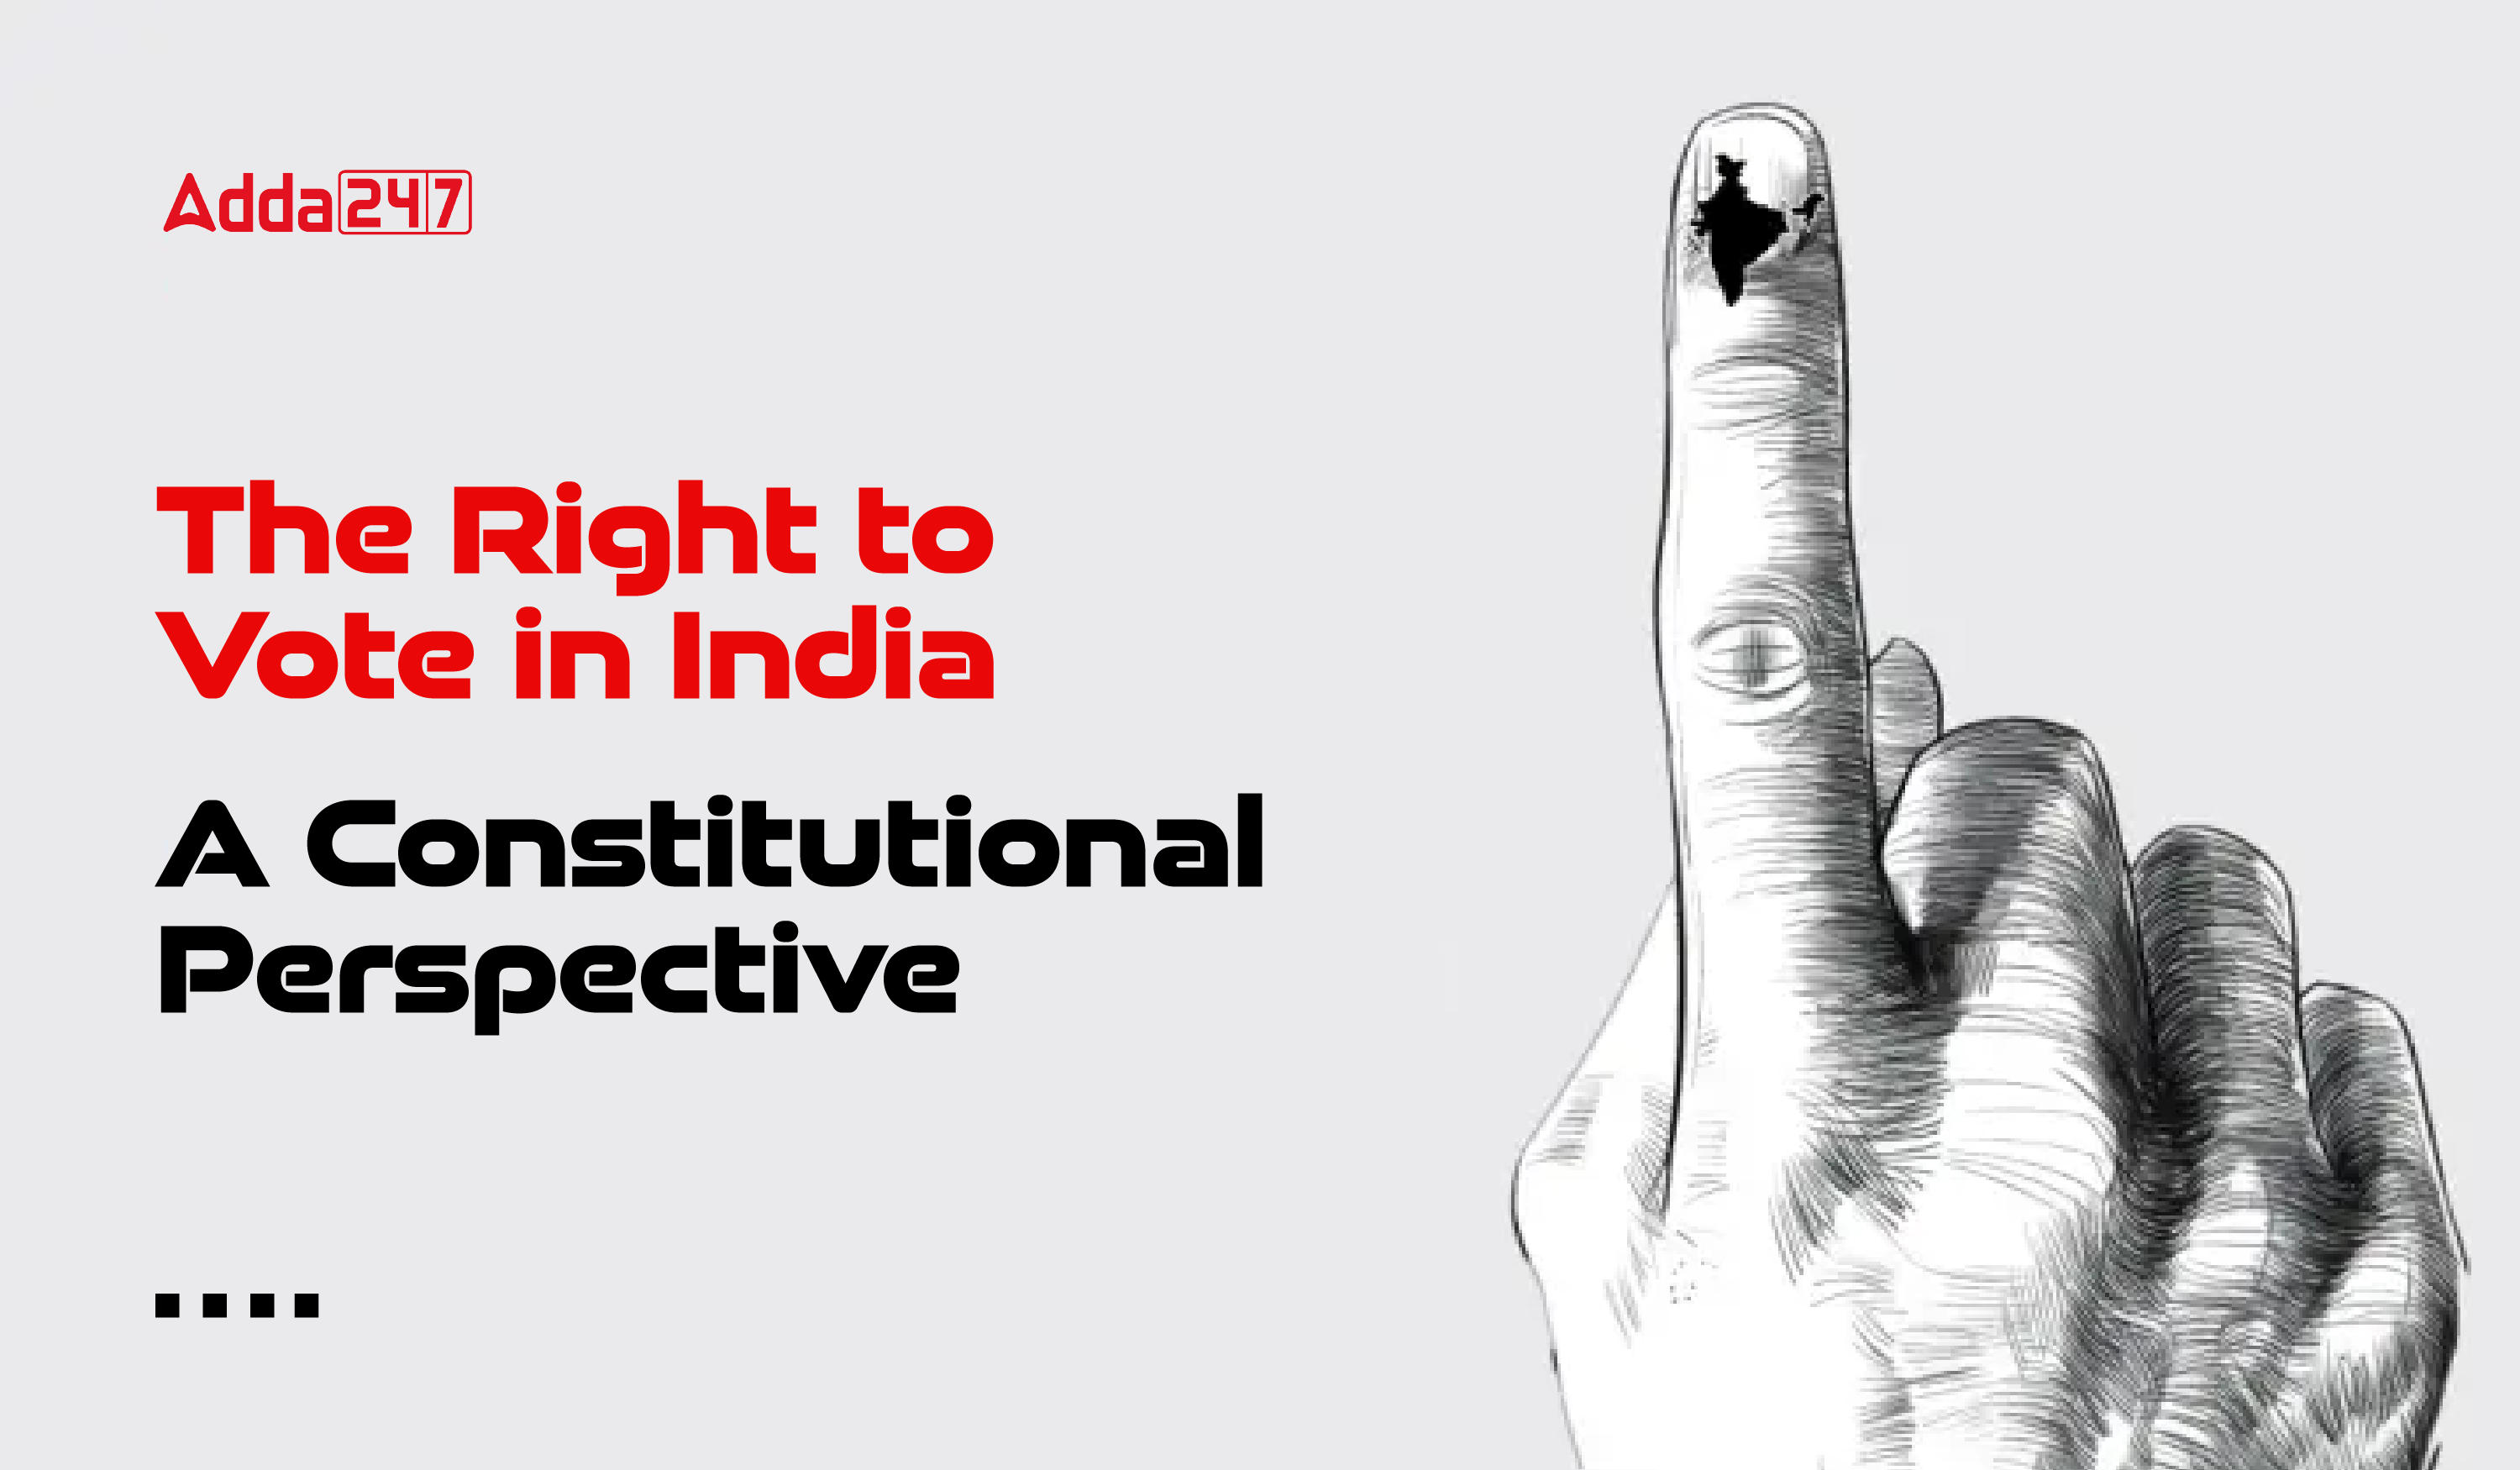 The Right to Vote in India: A Constitutional Perspective